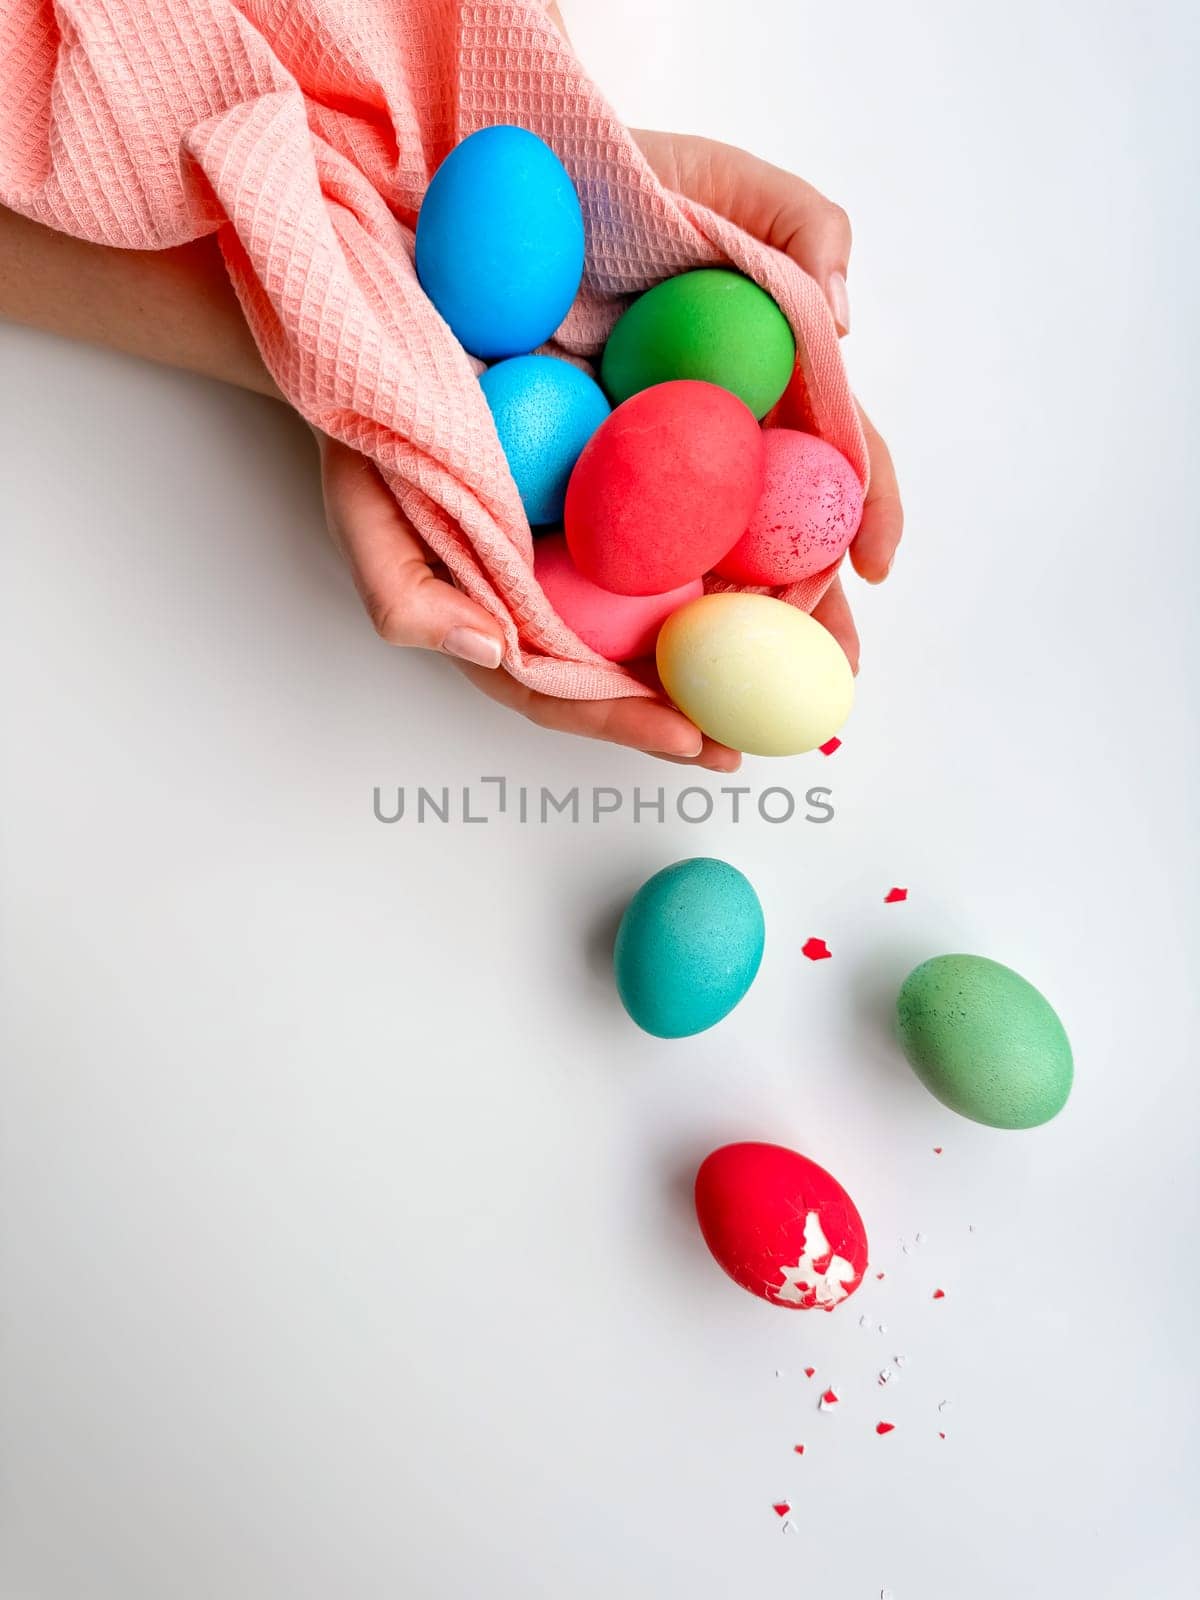 Hands holding colorful painted Easter eggs with one cracked egg on the side, representing Easter festivities, spring celebrations, and family fun activities. by Lunnica